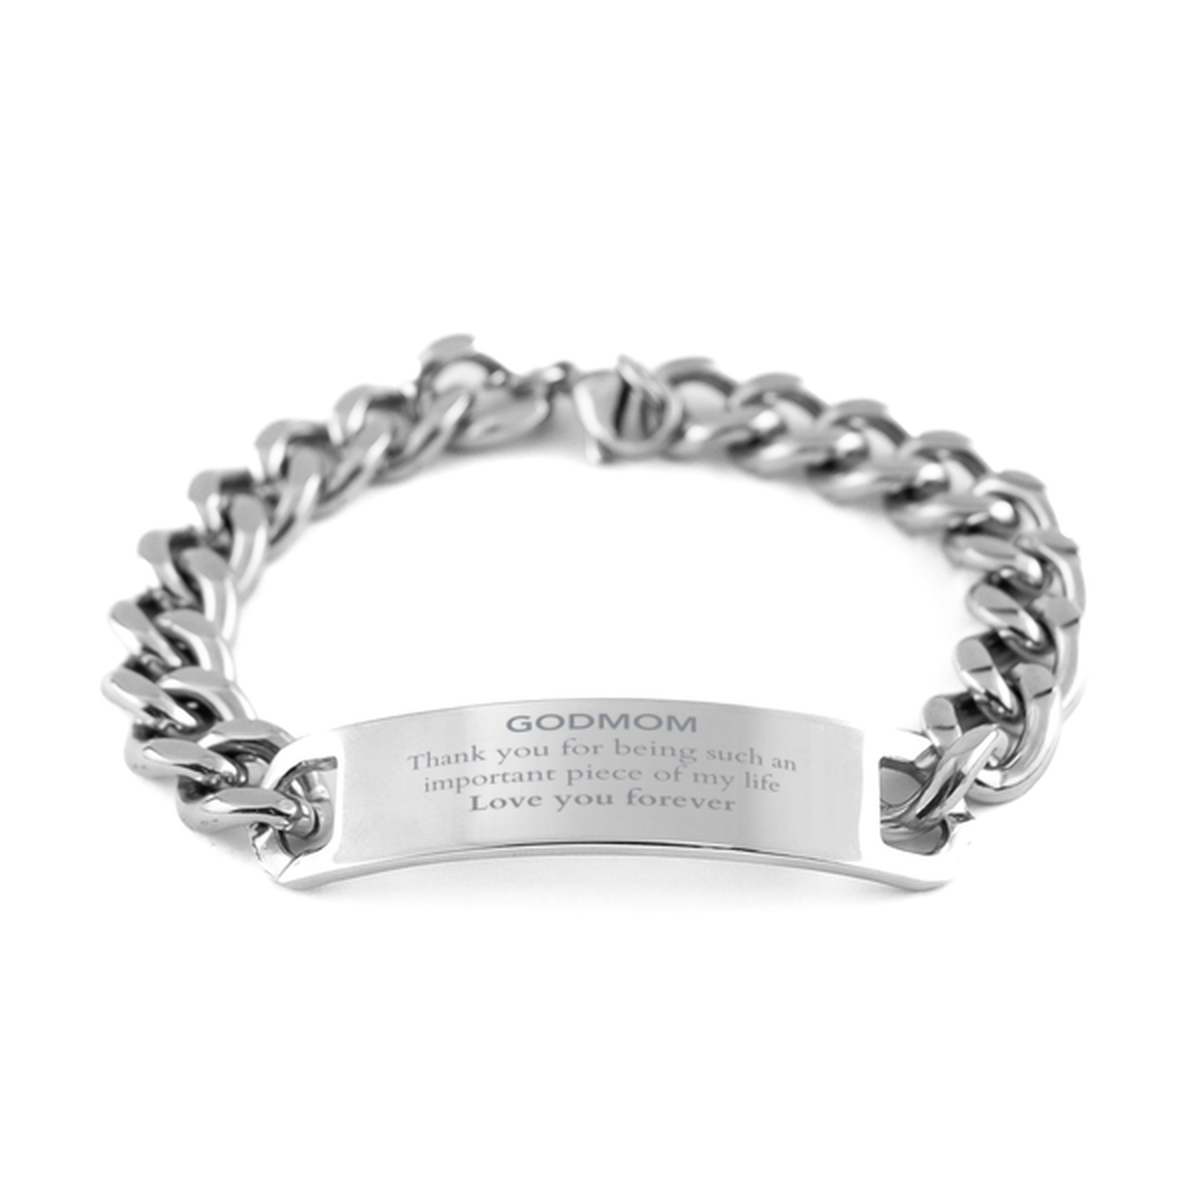 Appropriate Godmom Cuban Chain Stainless Steel Bracelet Epic Birthday Gifts for Godmom Thank you for being such an important piece of my life Godmom Christmas Mothers Fathers Day